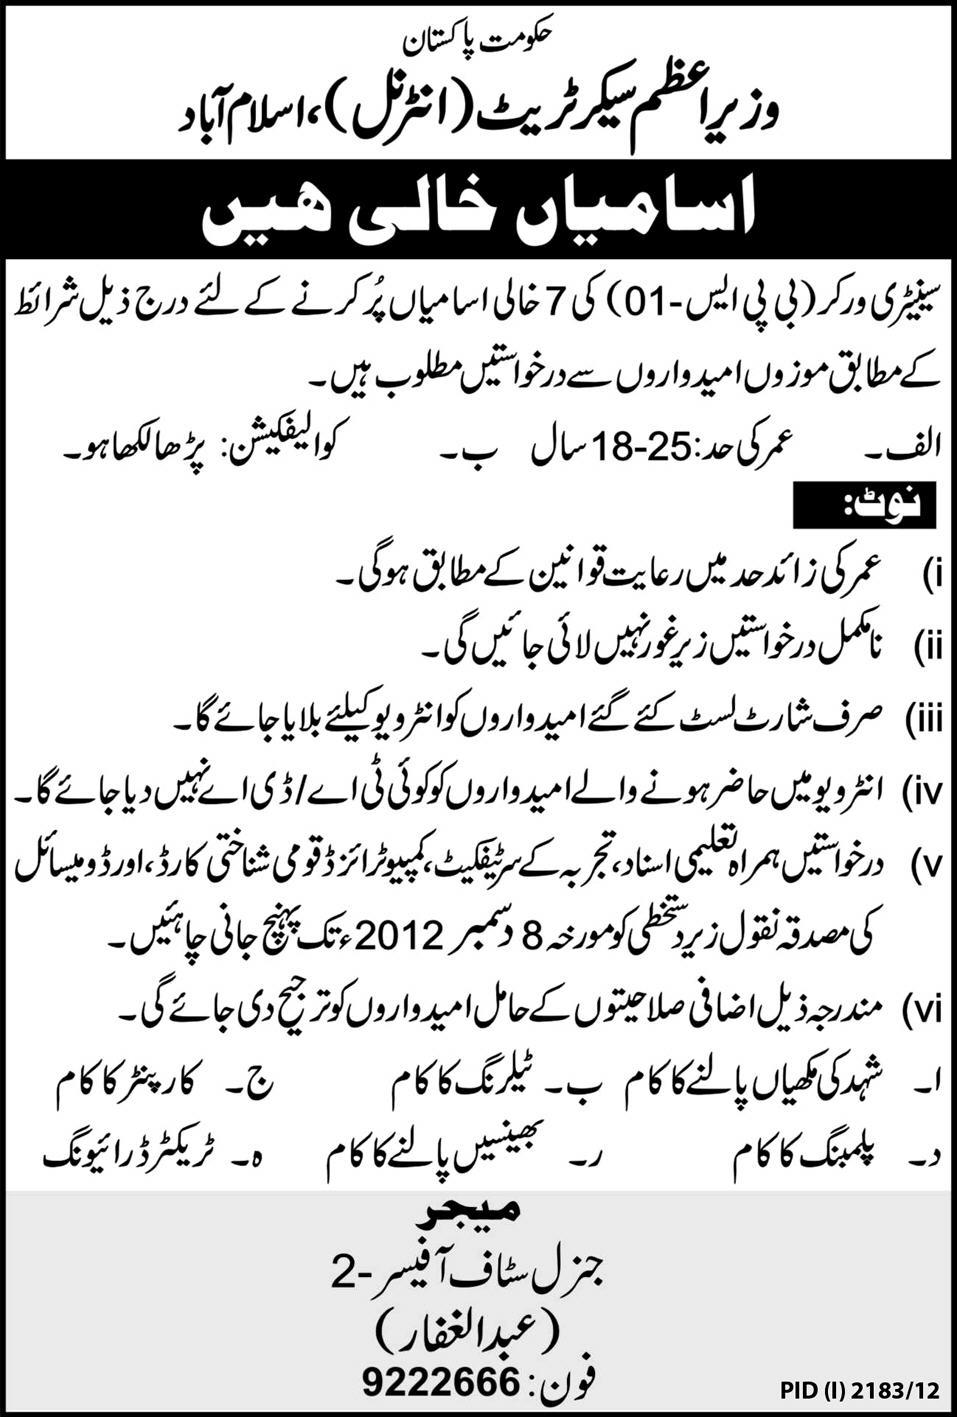 Prime Minister Secretariat Islamabad Requires Sanitary Workers